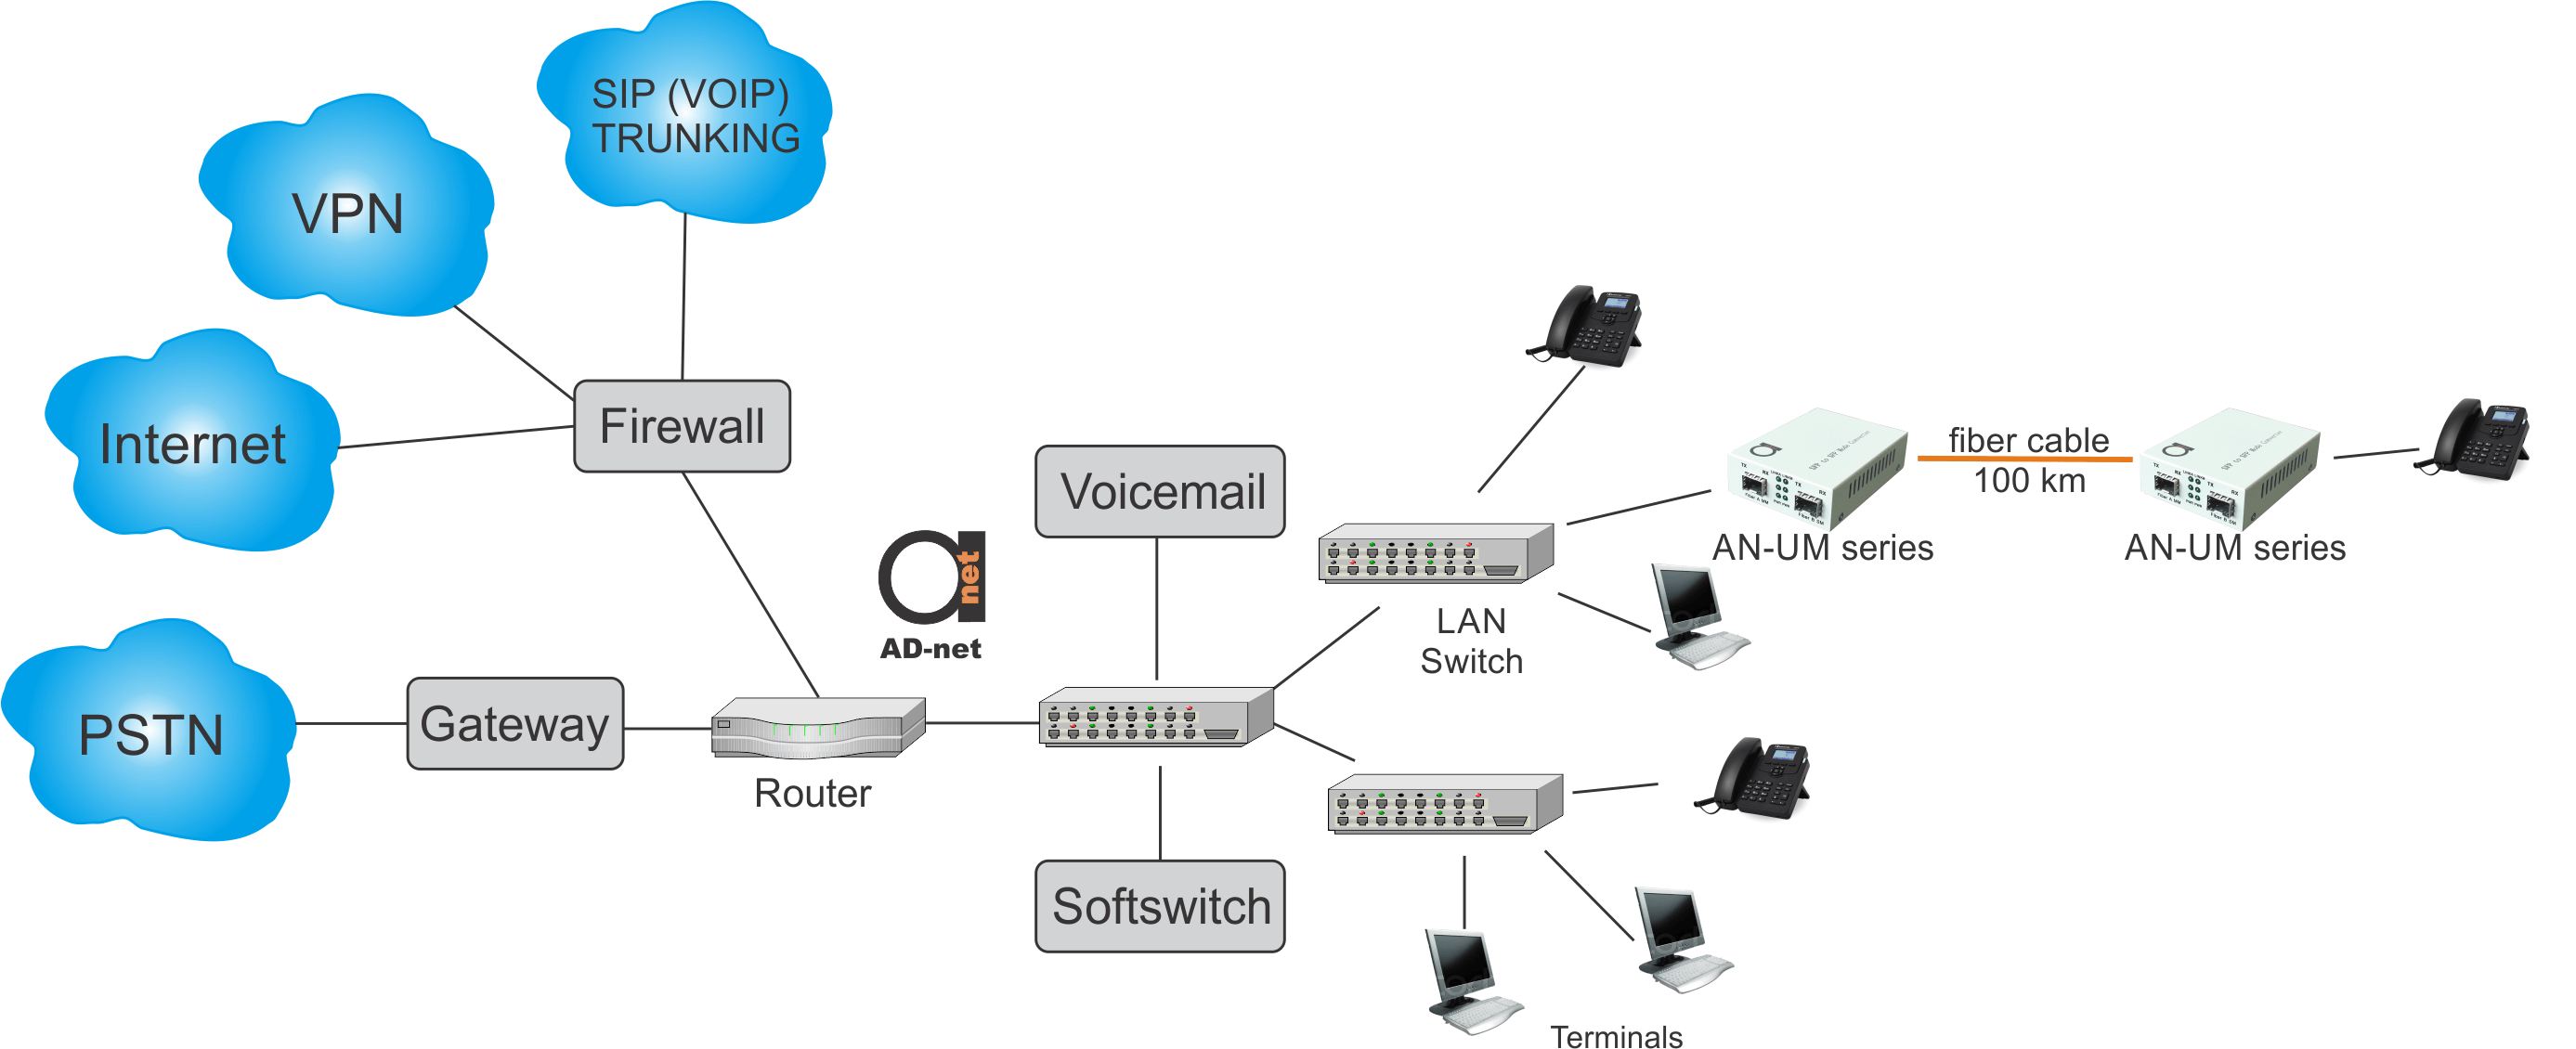 Key network elements of typical VoIP scheme